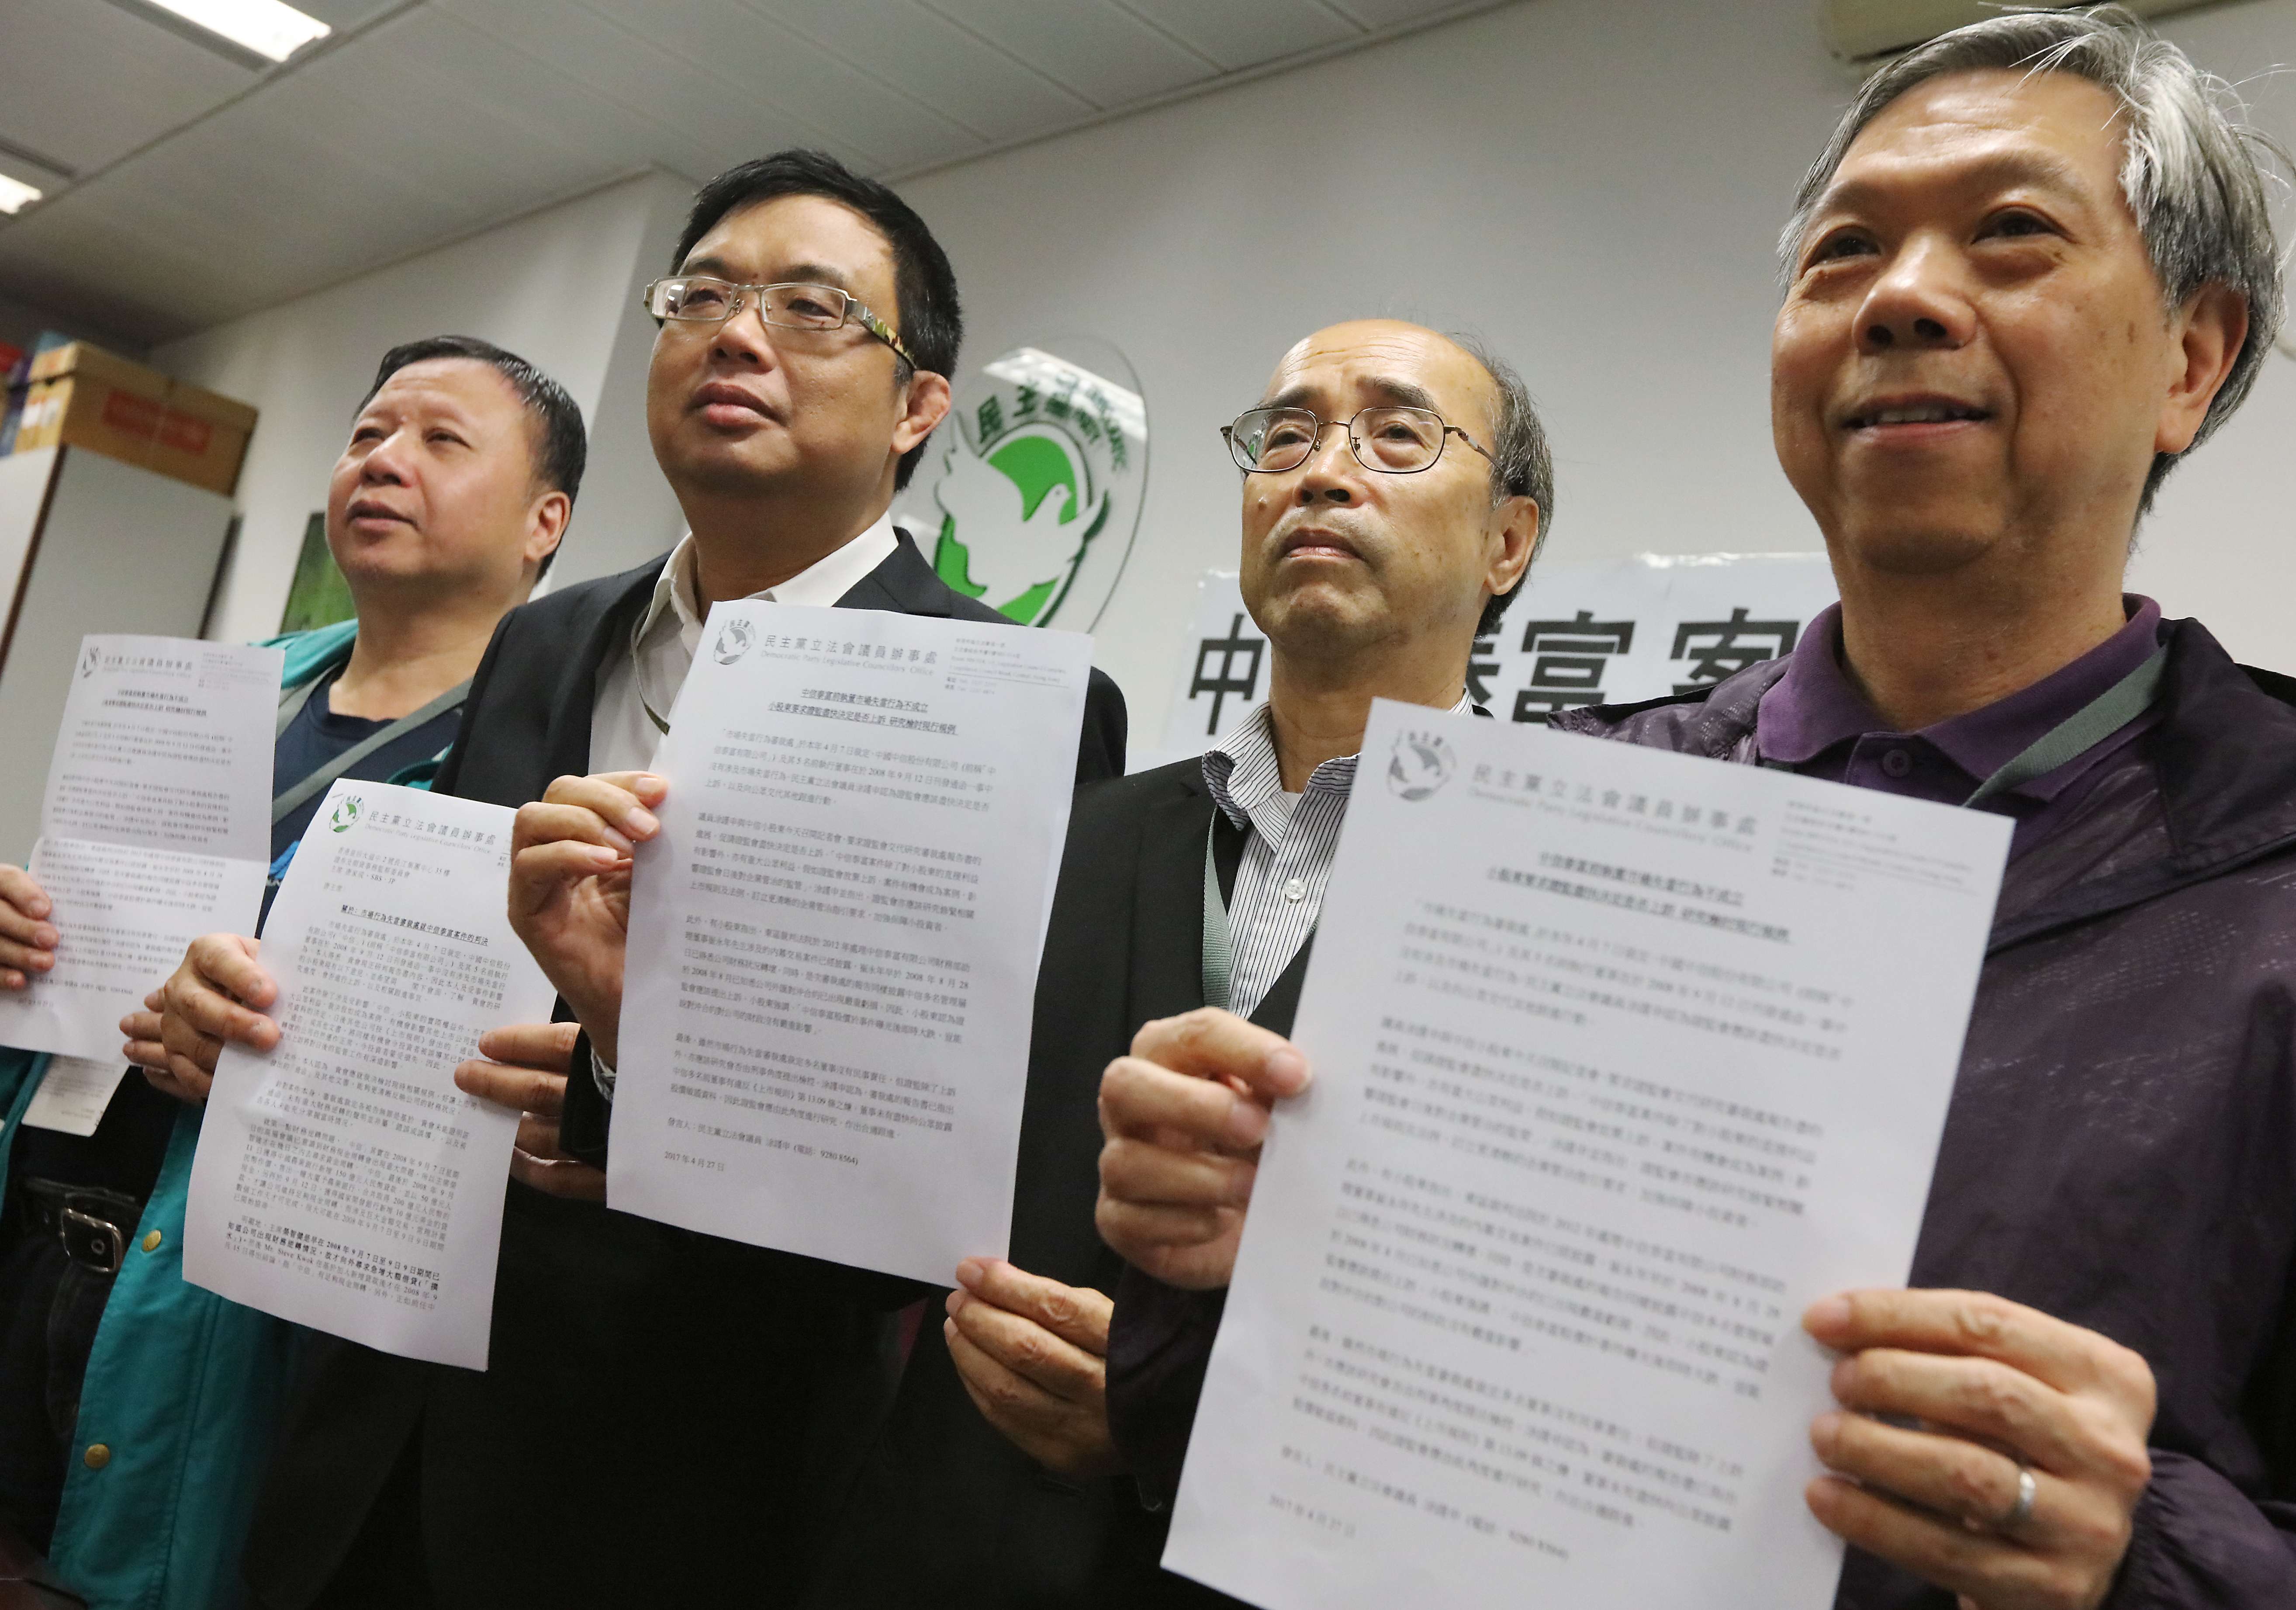 Lawmaker James To (second from left) and Citic’s small shareholders have urged the SFC to appeal against a ruling by the Market Misconduct Tribunal that cleared former chairman Larry Yung and four other ex-directors of misconduct and of providing misleading information over losses from foreign-currency bets in 2008. Photo: Felix Wong